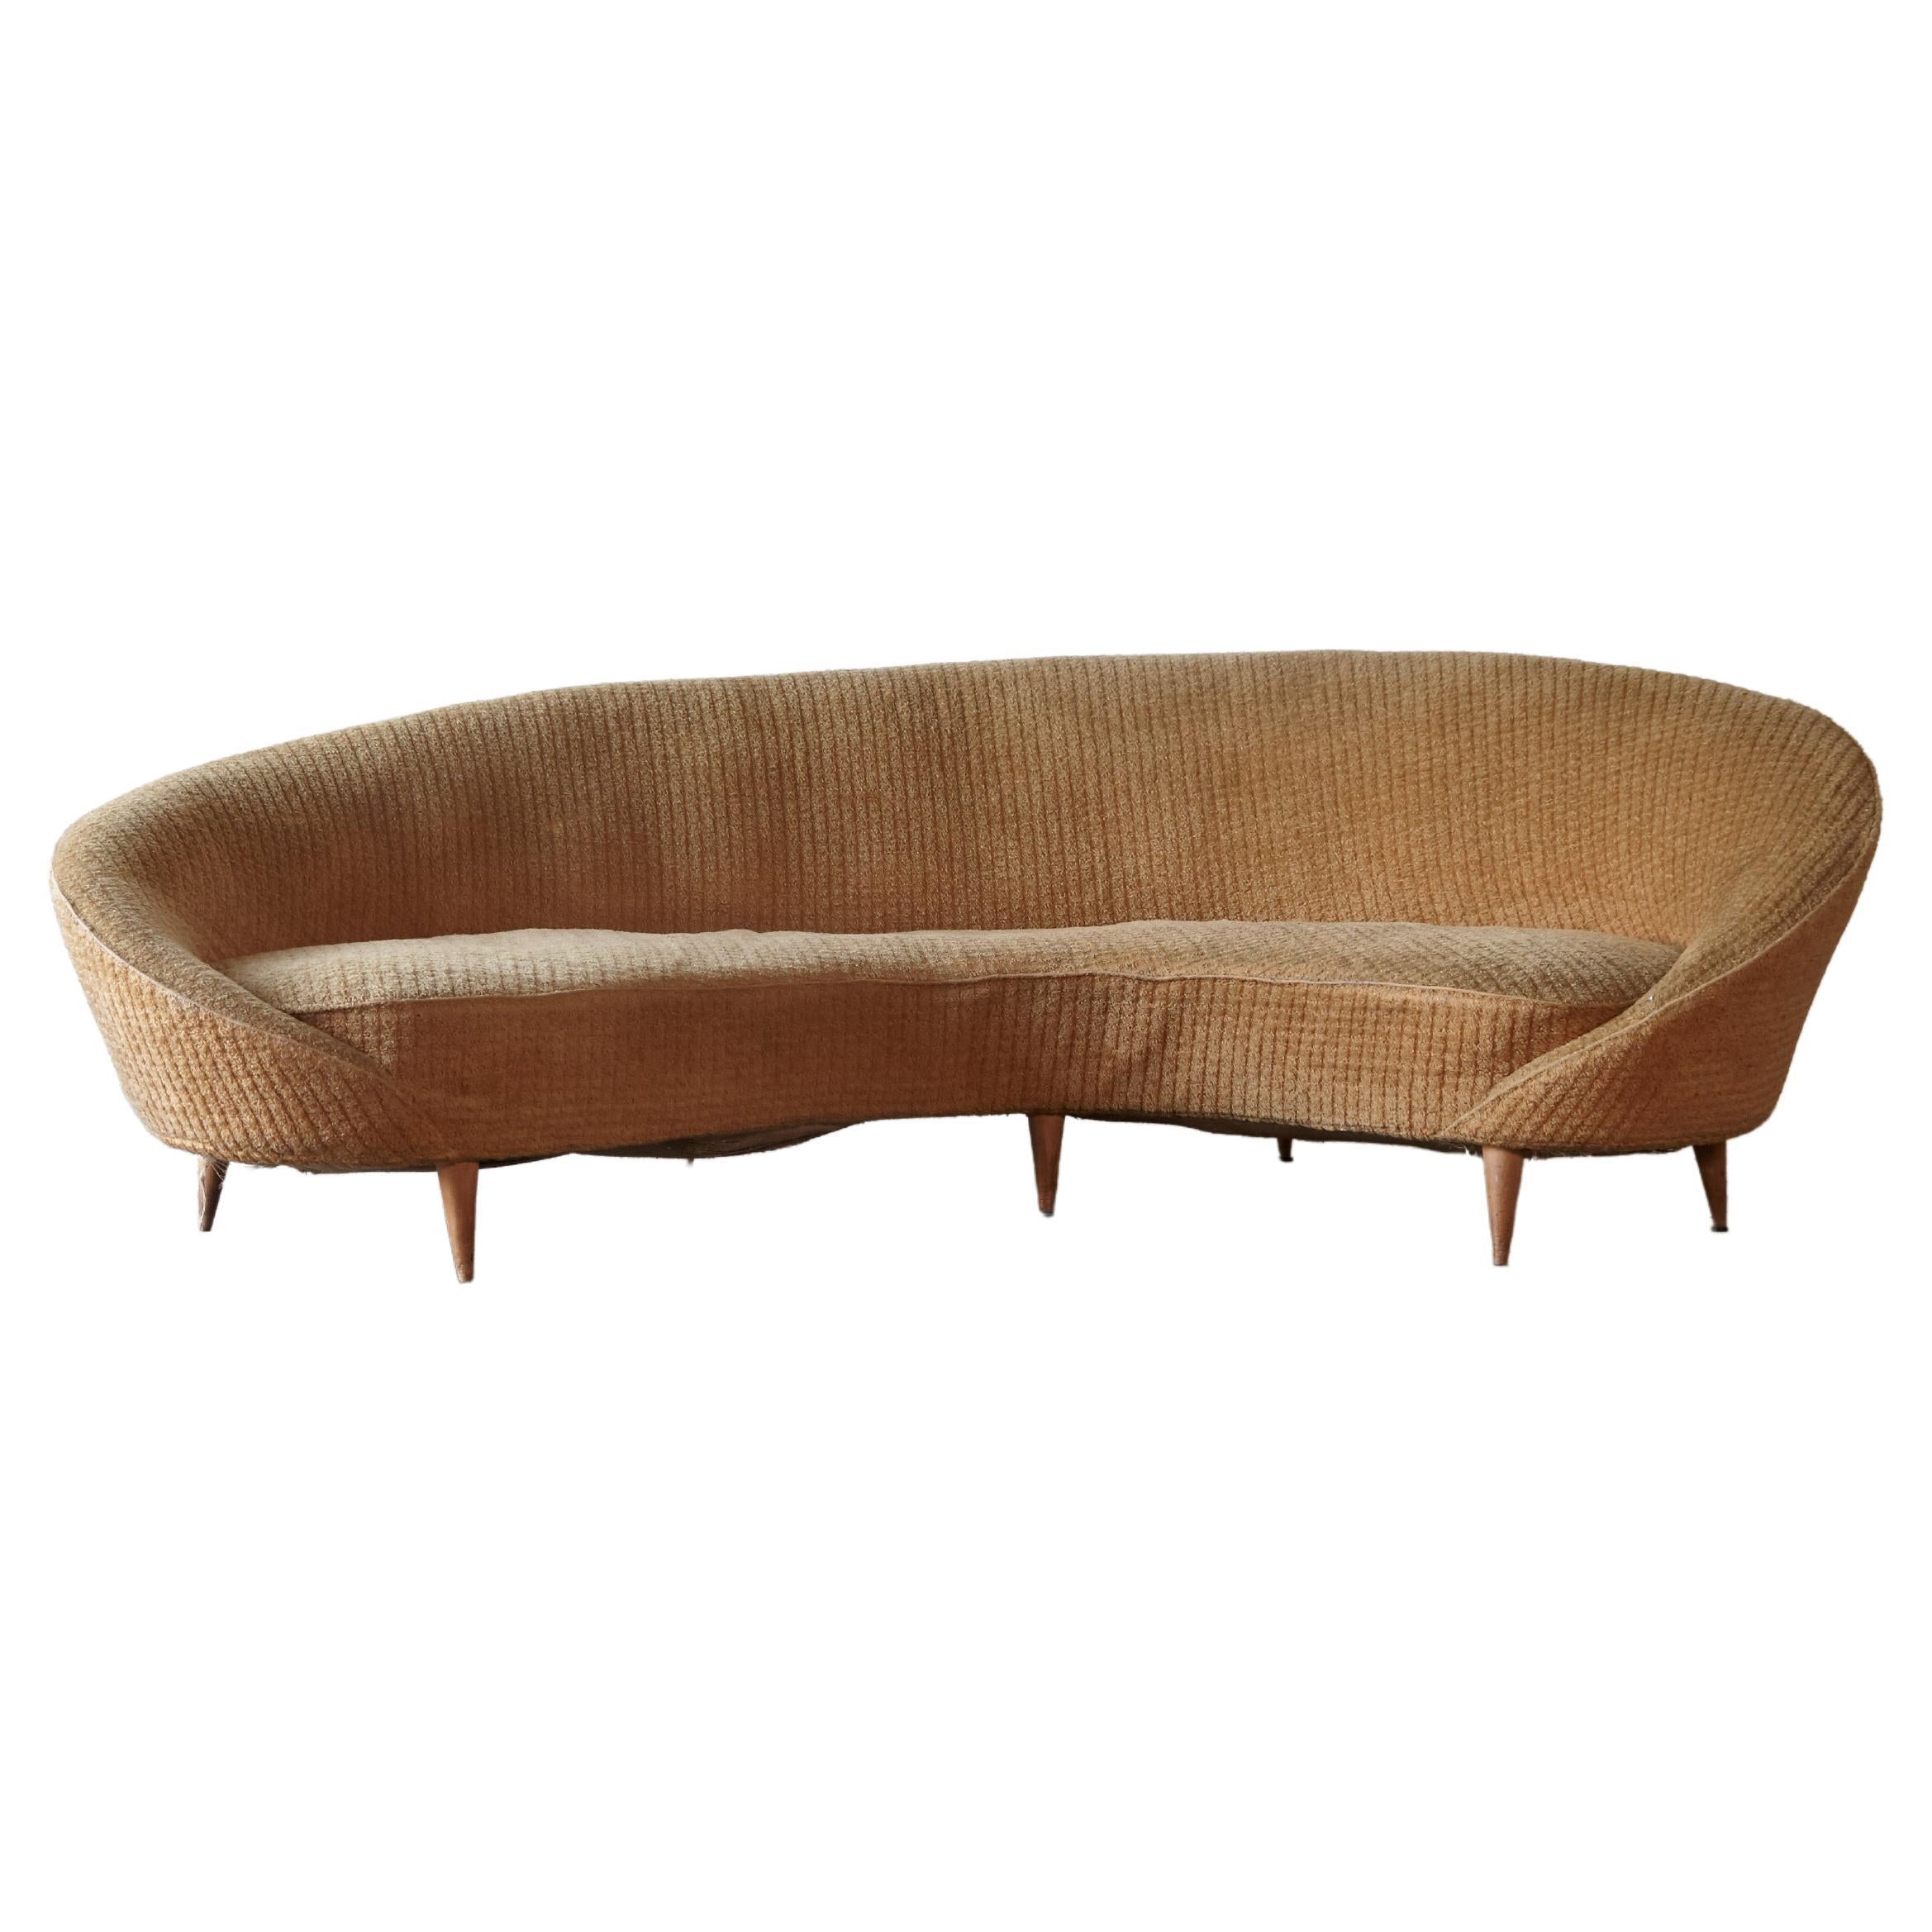 Curved Sofa Attributed to Ico Parisi / Munari, Italy, 1950, for Reupholstery